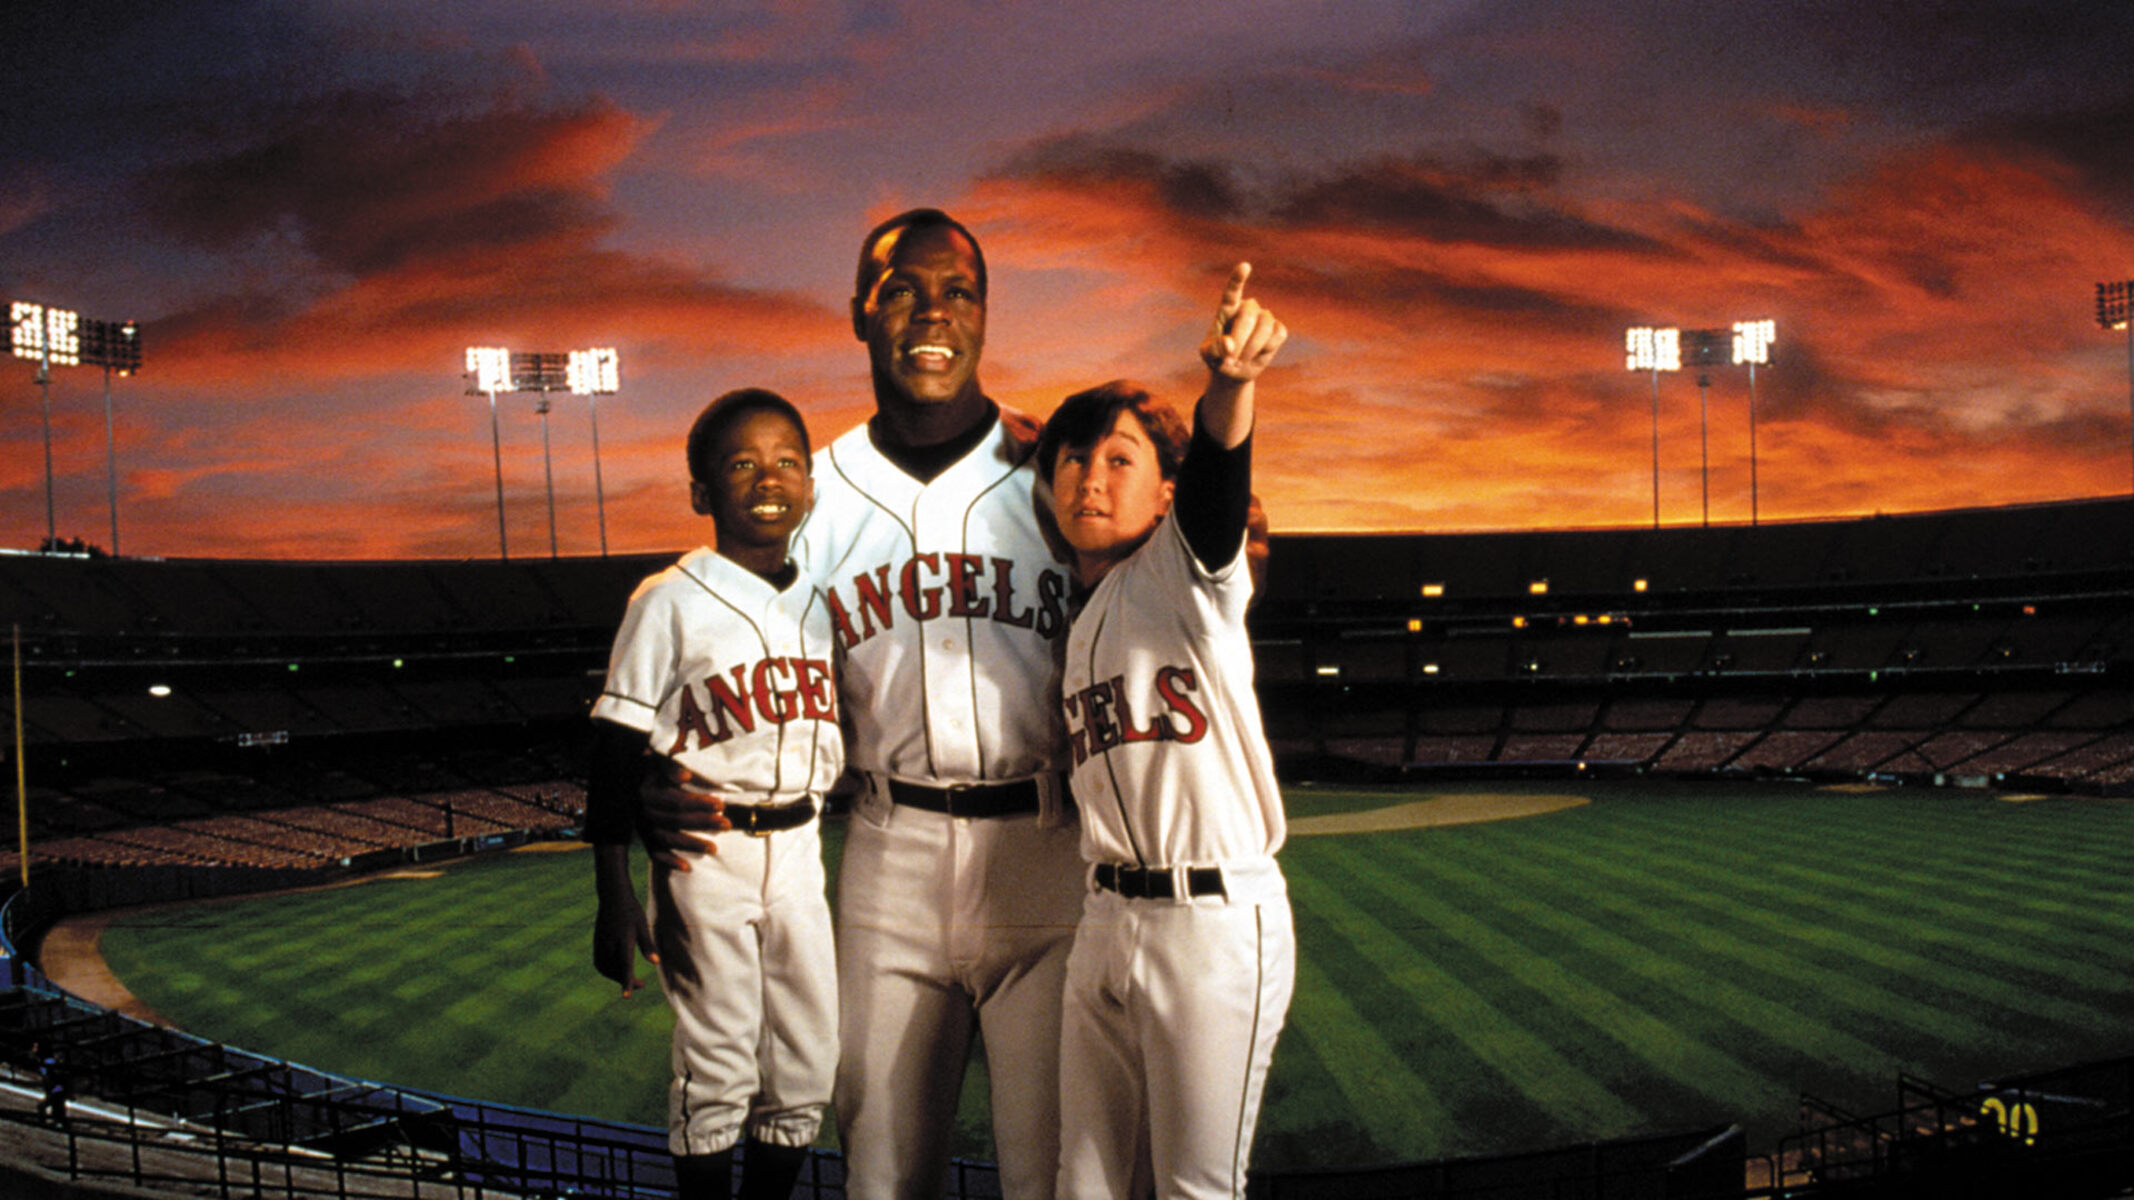 How To Watch Angels In The Outfield